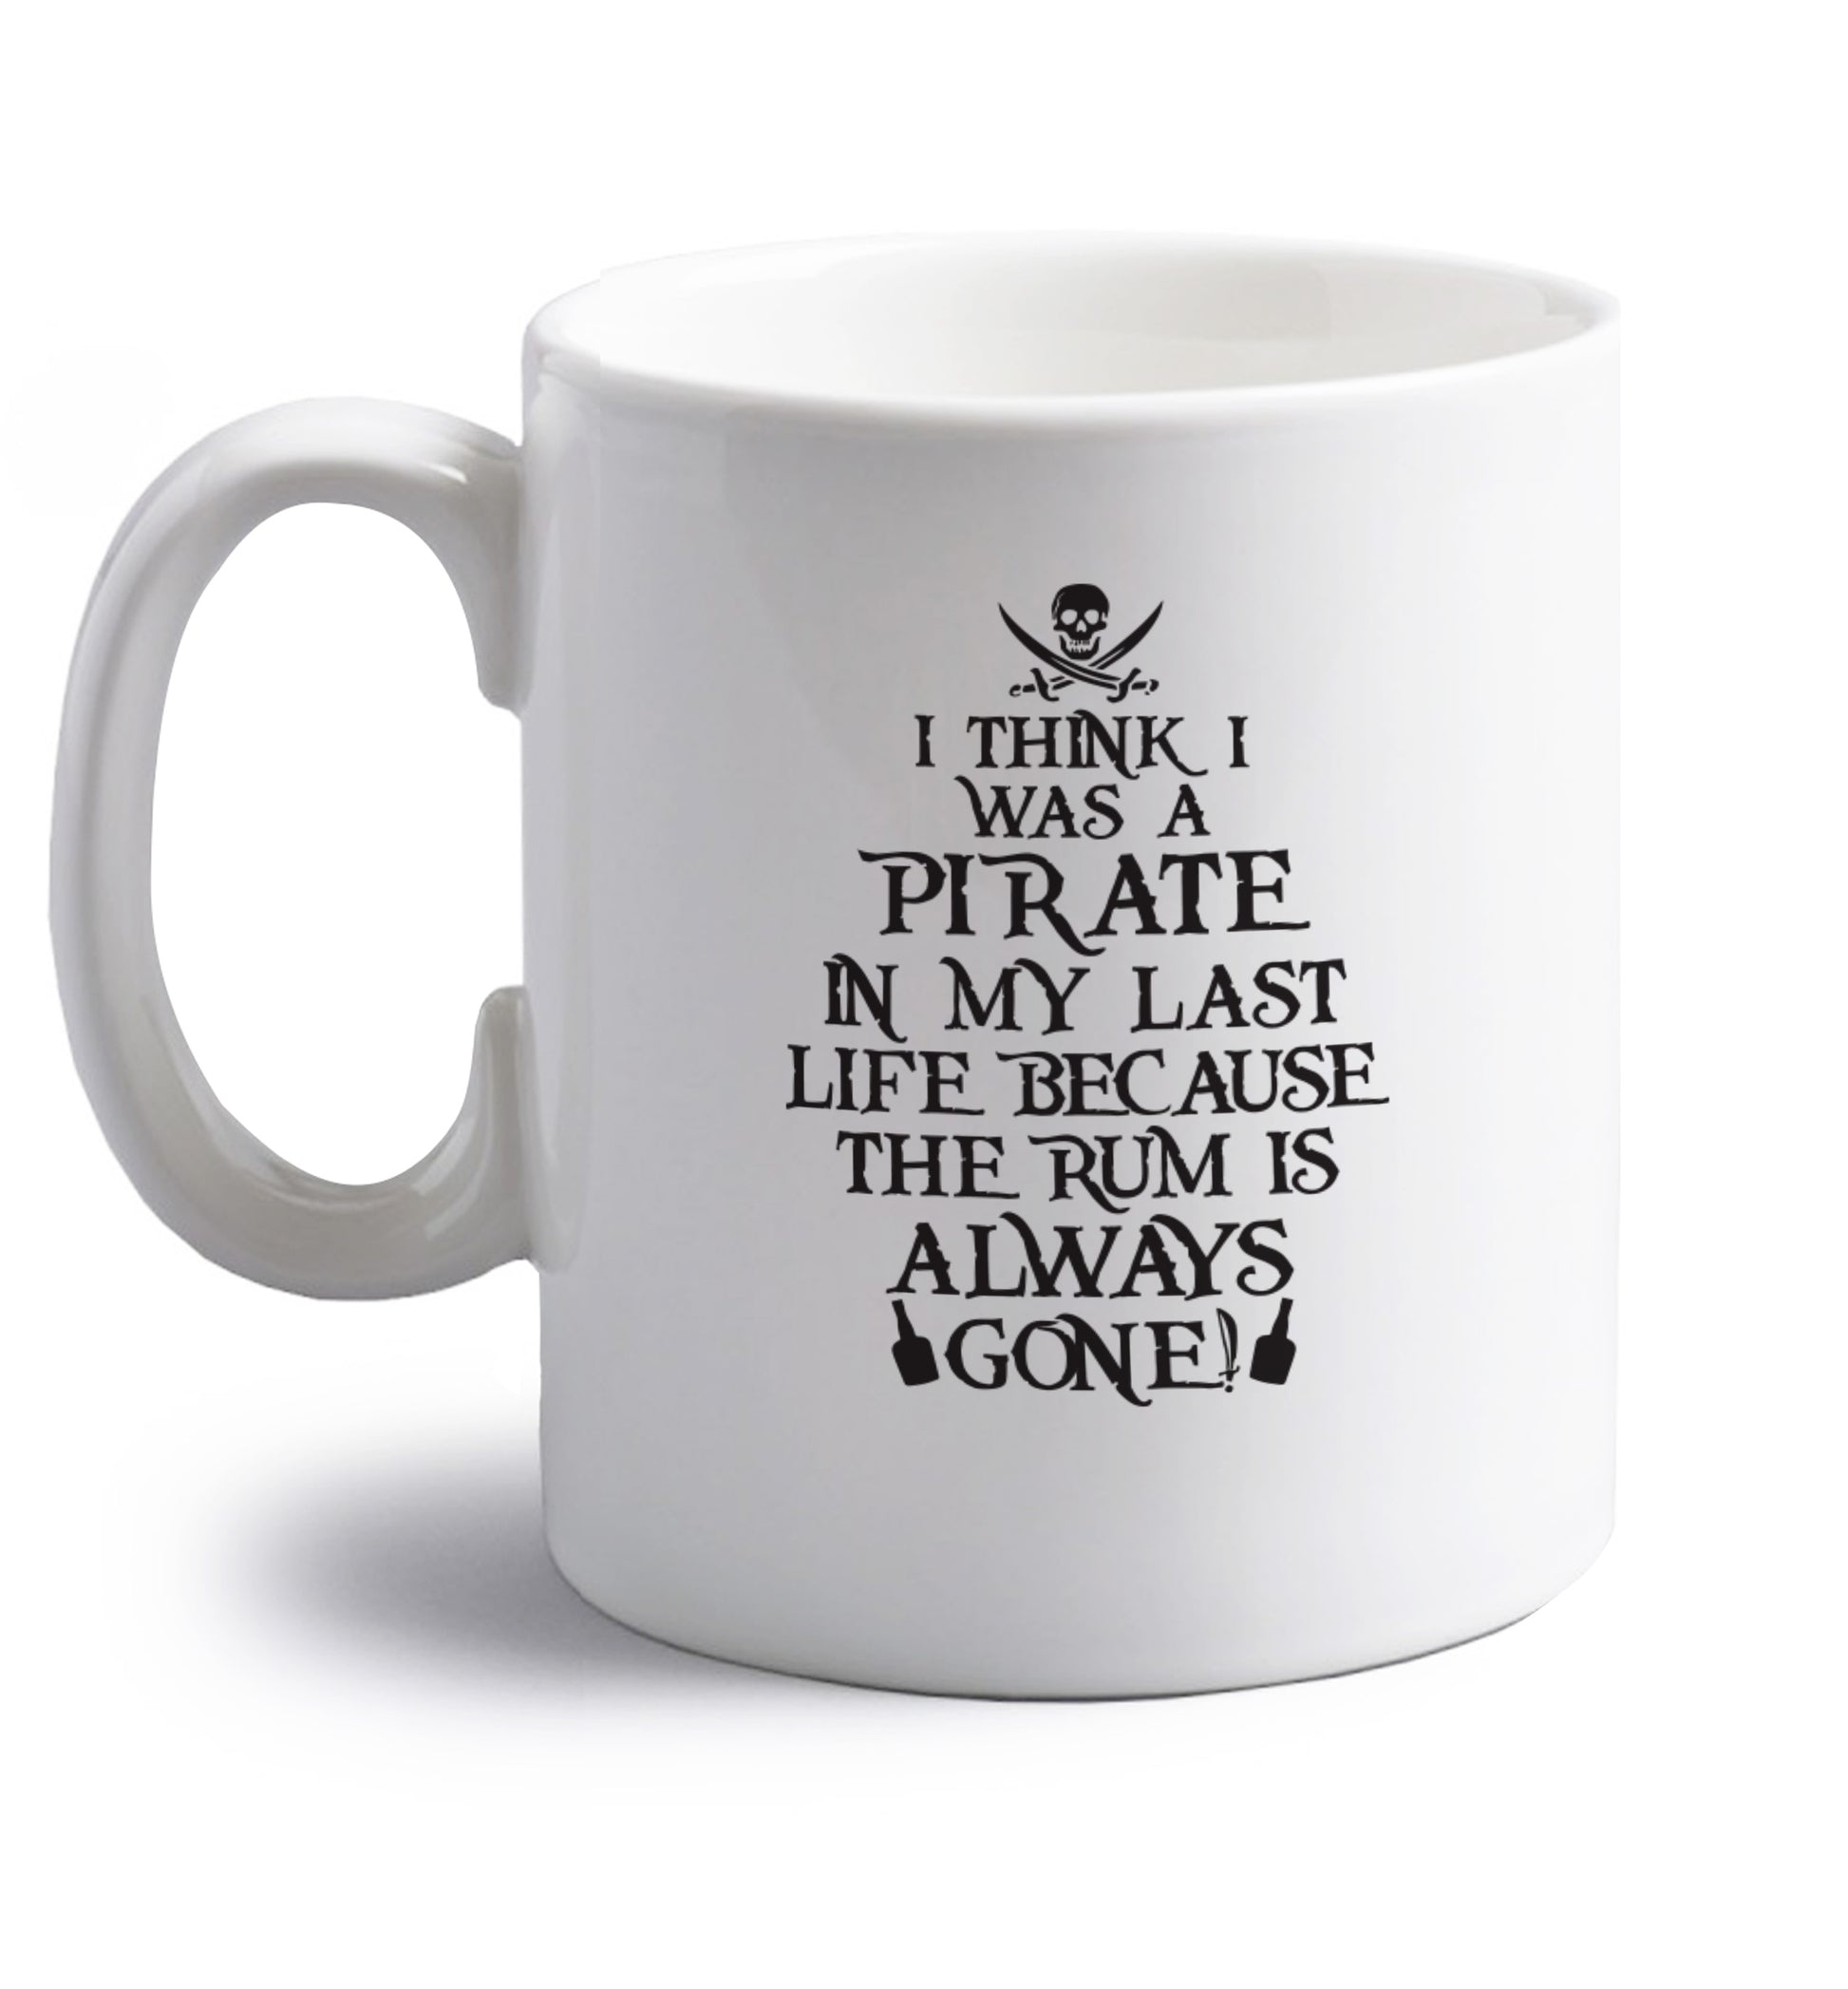 I think I was a pirate in my past life because the rum is always gone! right handed white ceramic mug 